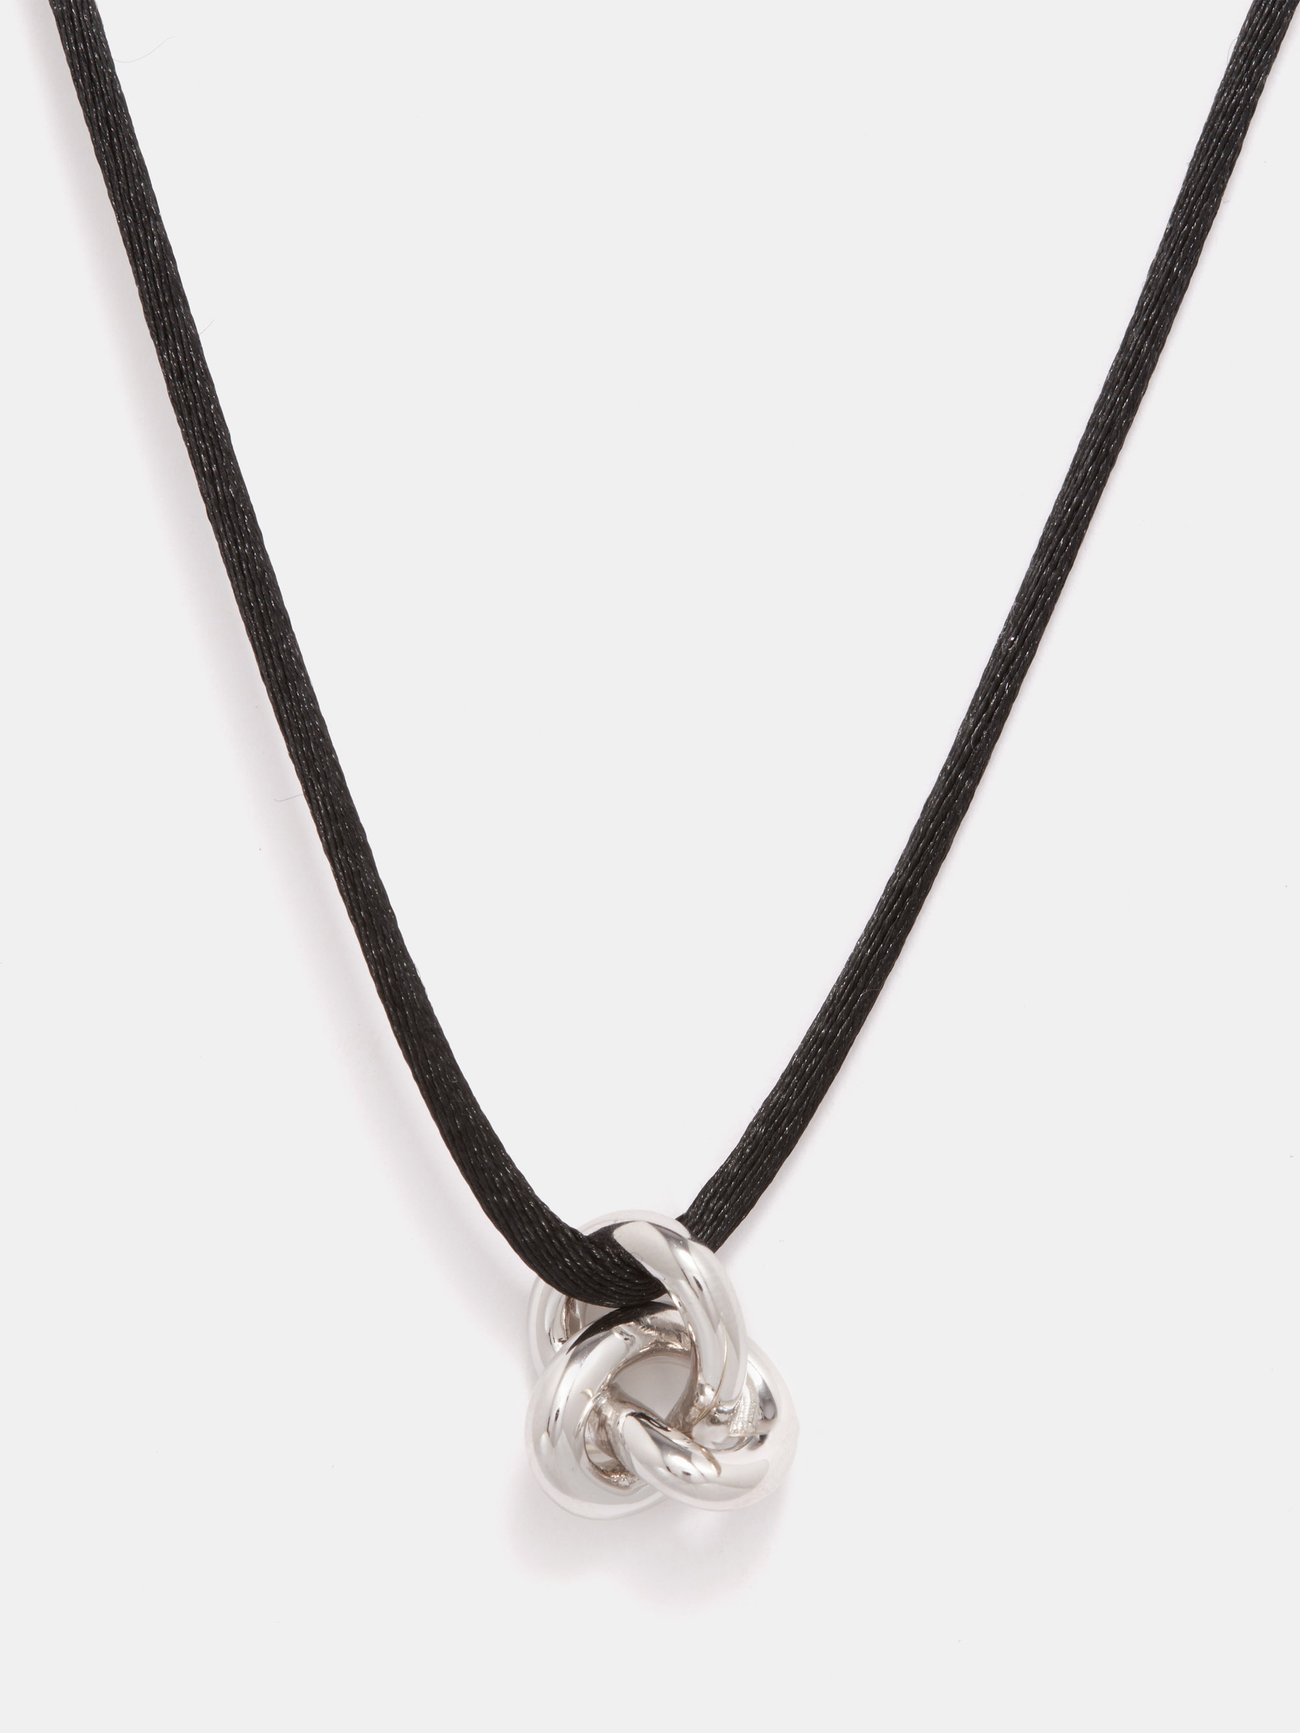 Hercules Knot Necklace - 925 Sterling Silver - GREEK ROOTS